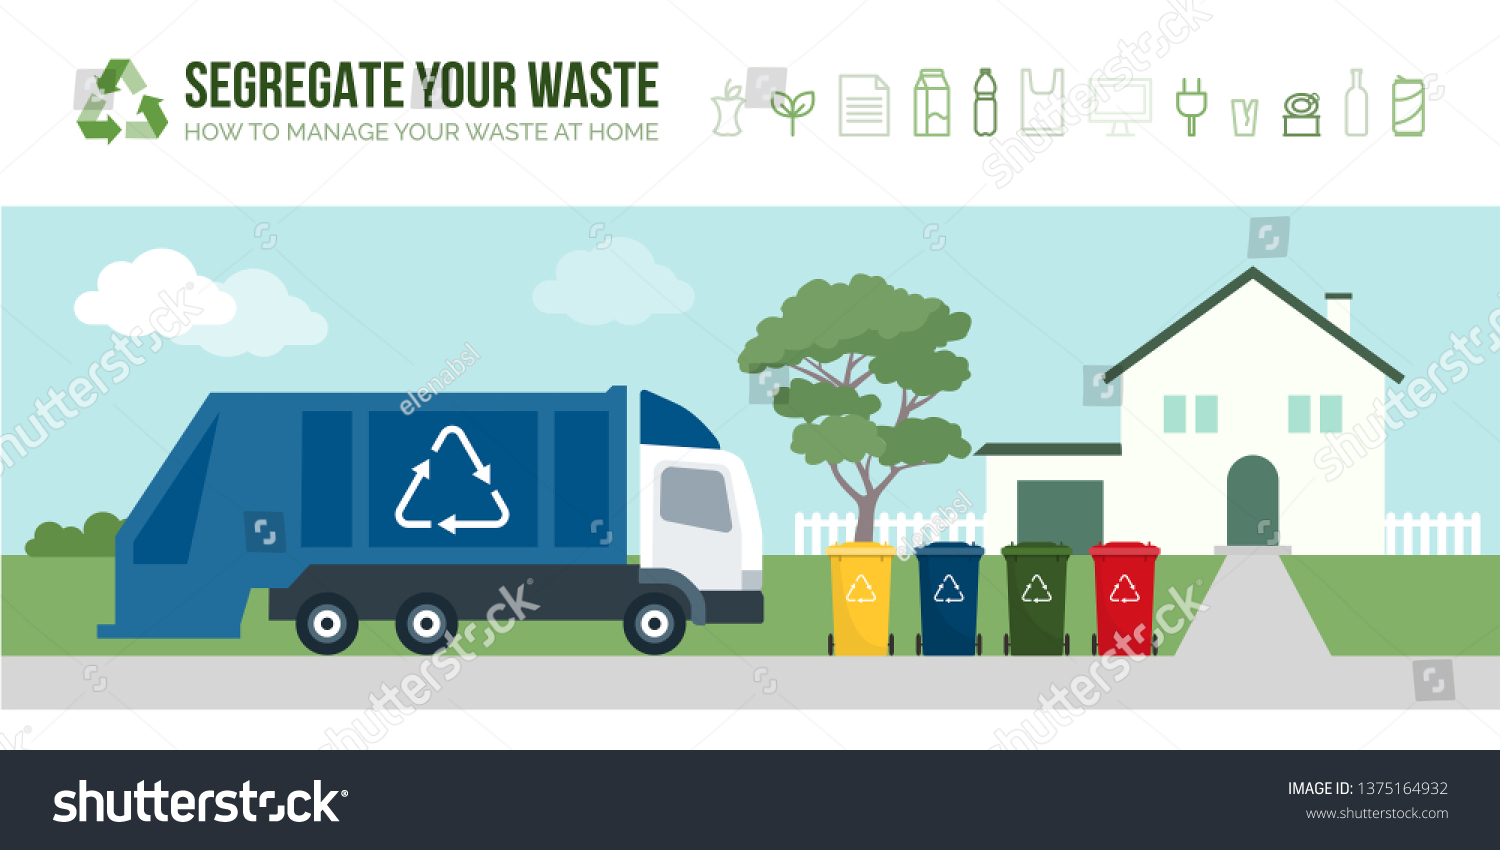 SVG of Rubbish truck collecting garbage bins in the street: separate waste collection management and recycling concept svg